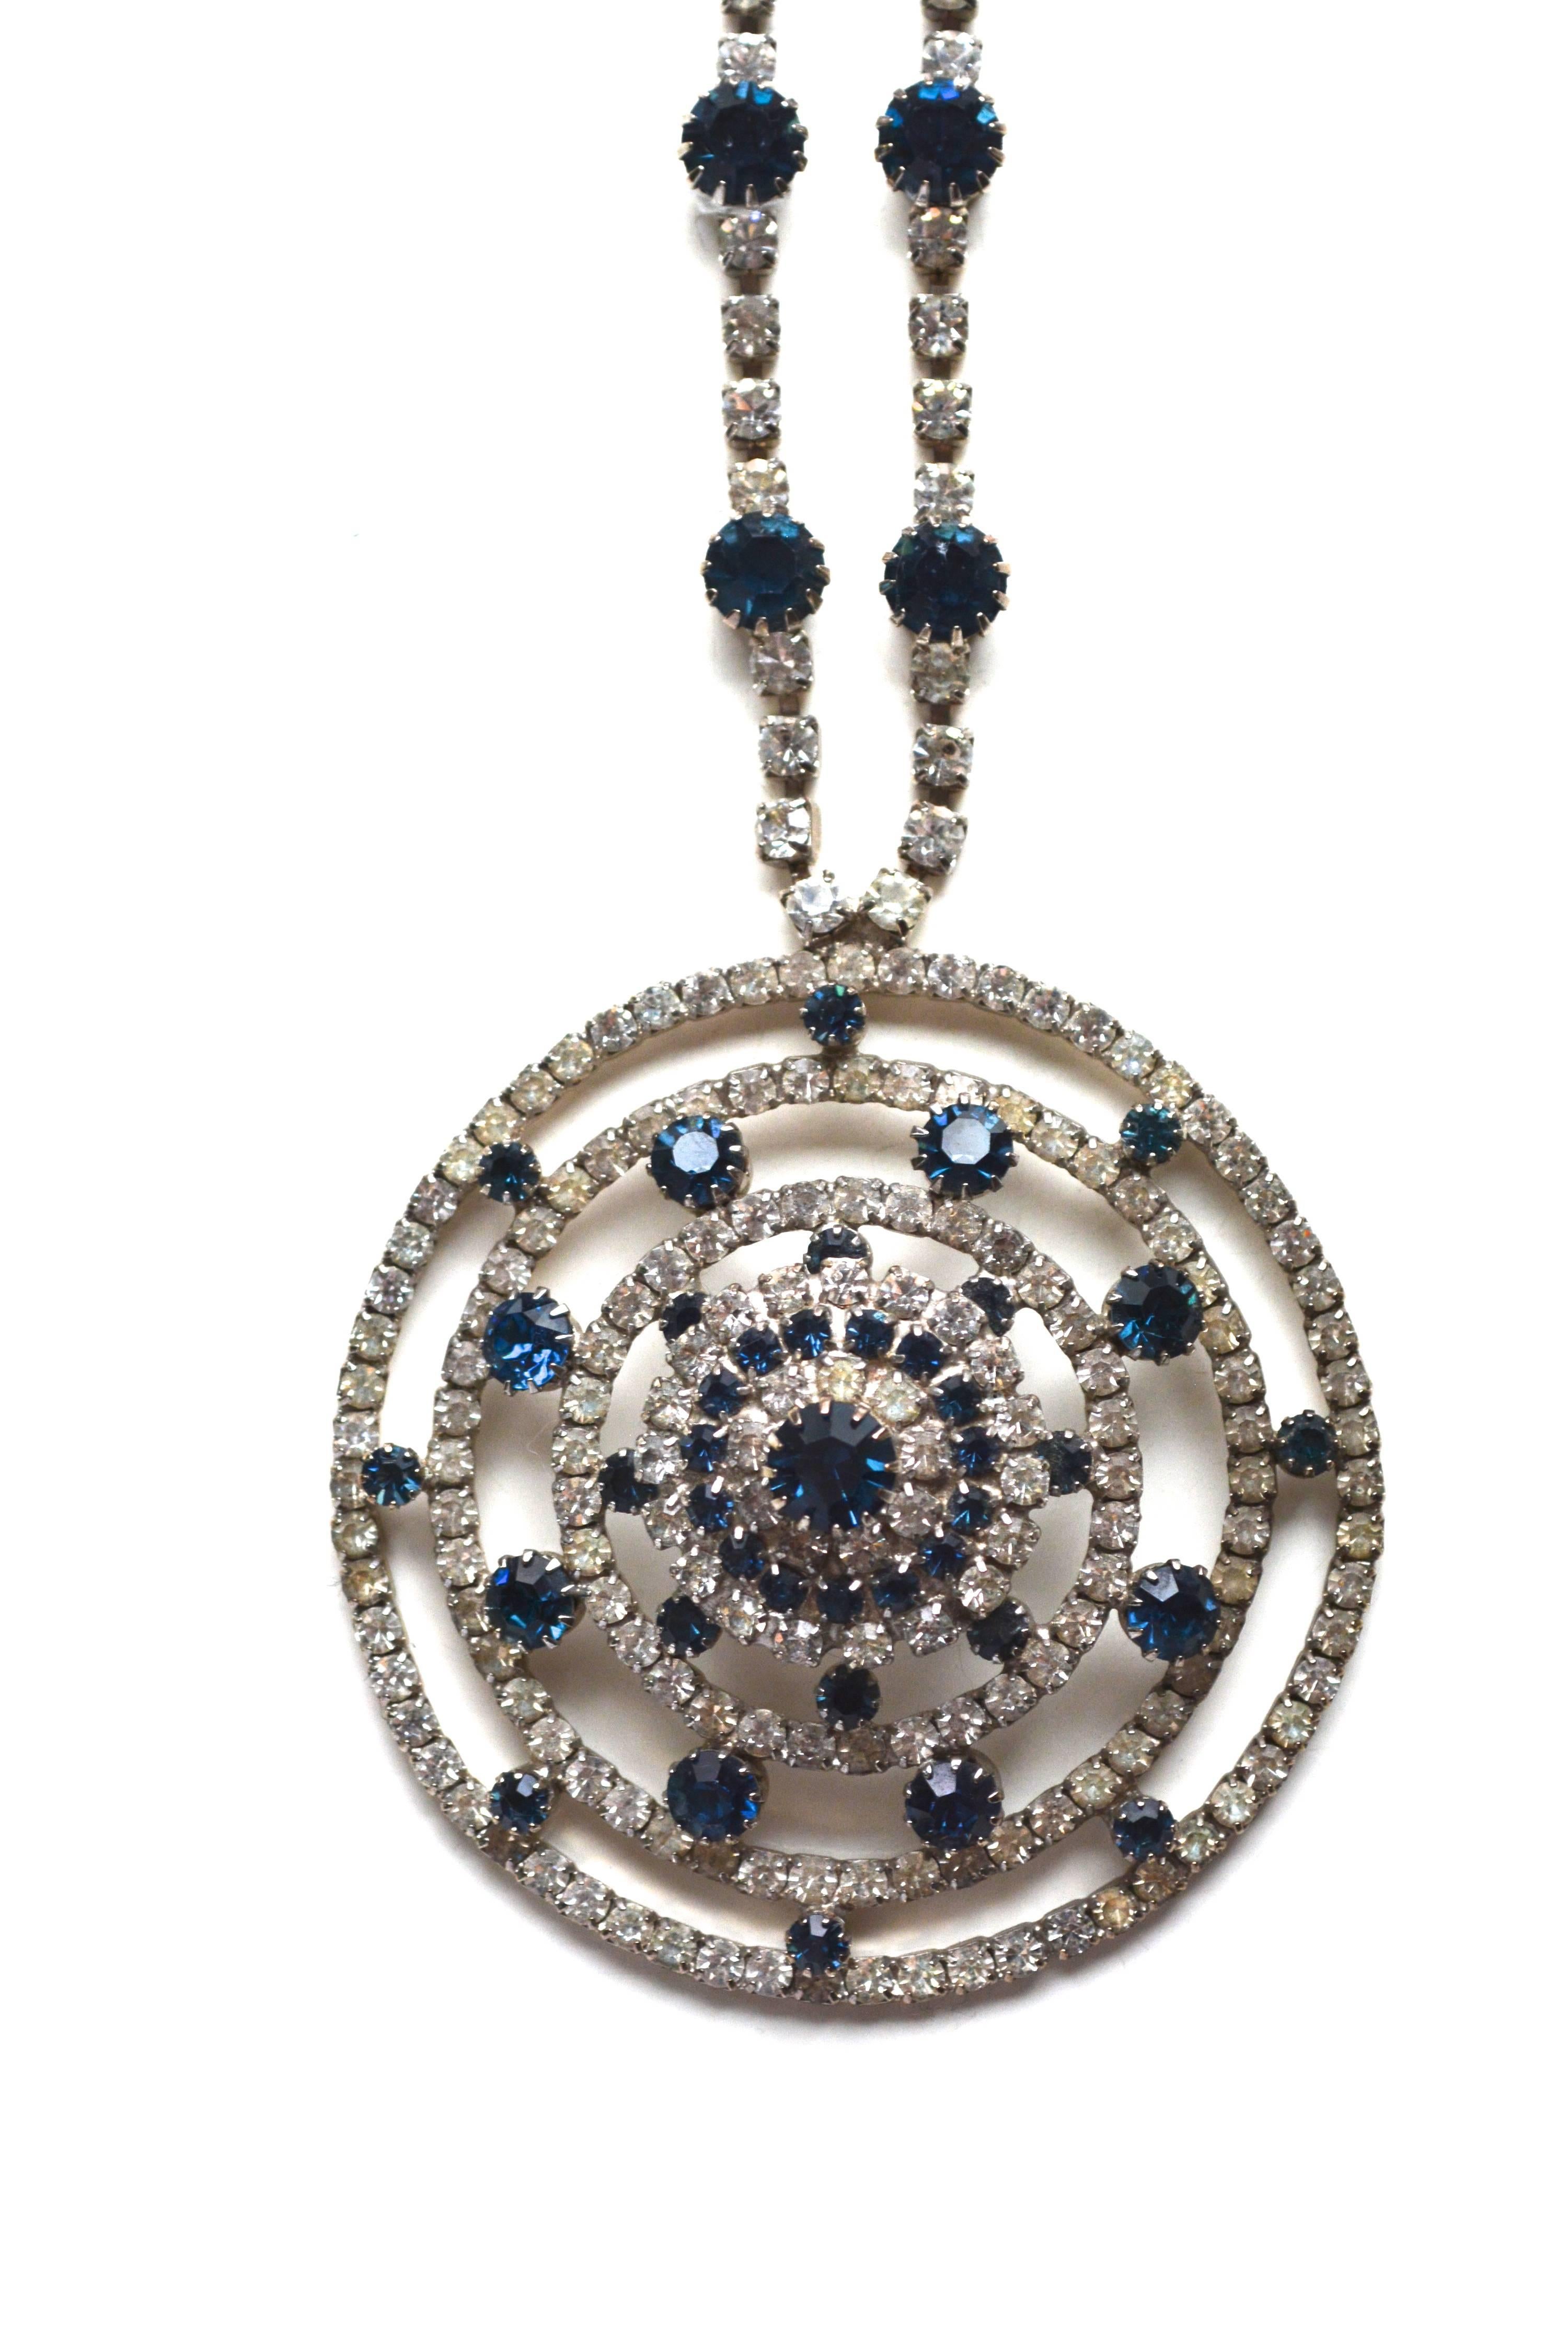 Vintage unsigned rhinestone necklace with clear and sapphire blues stones, very 